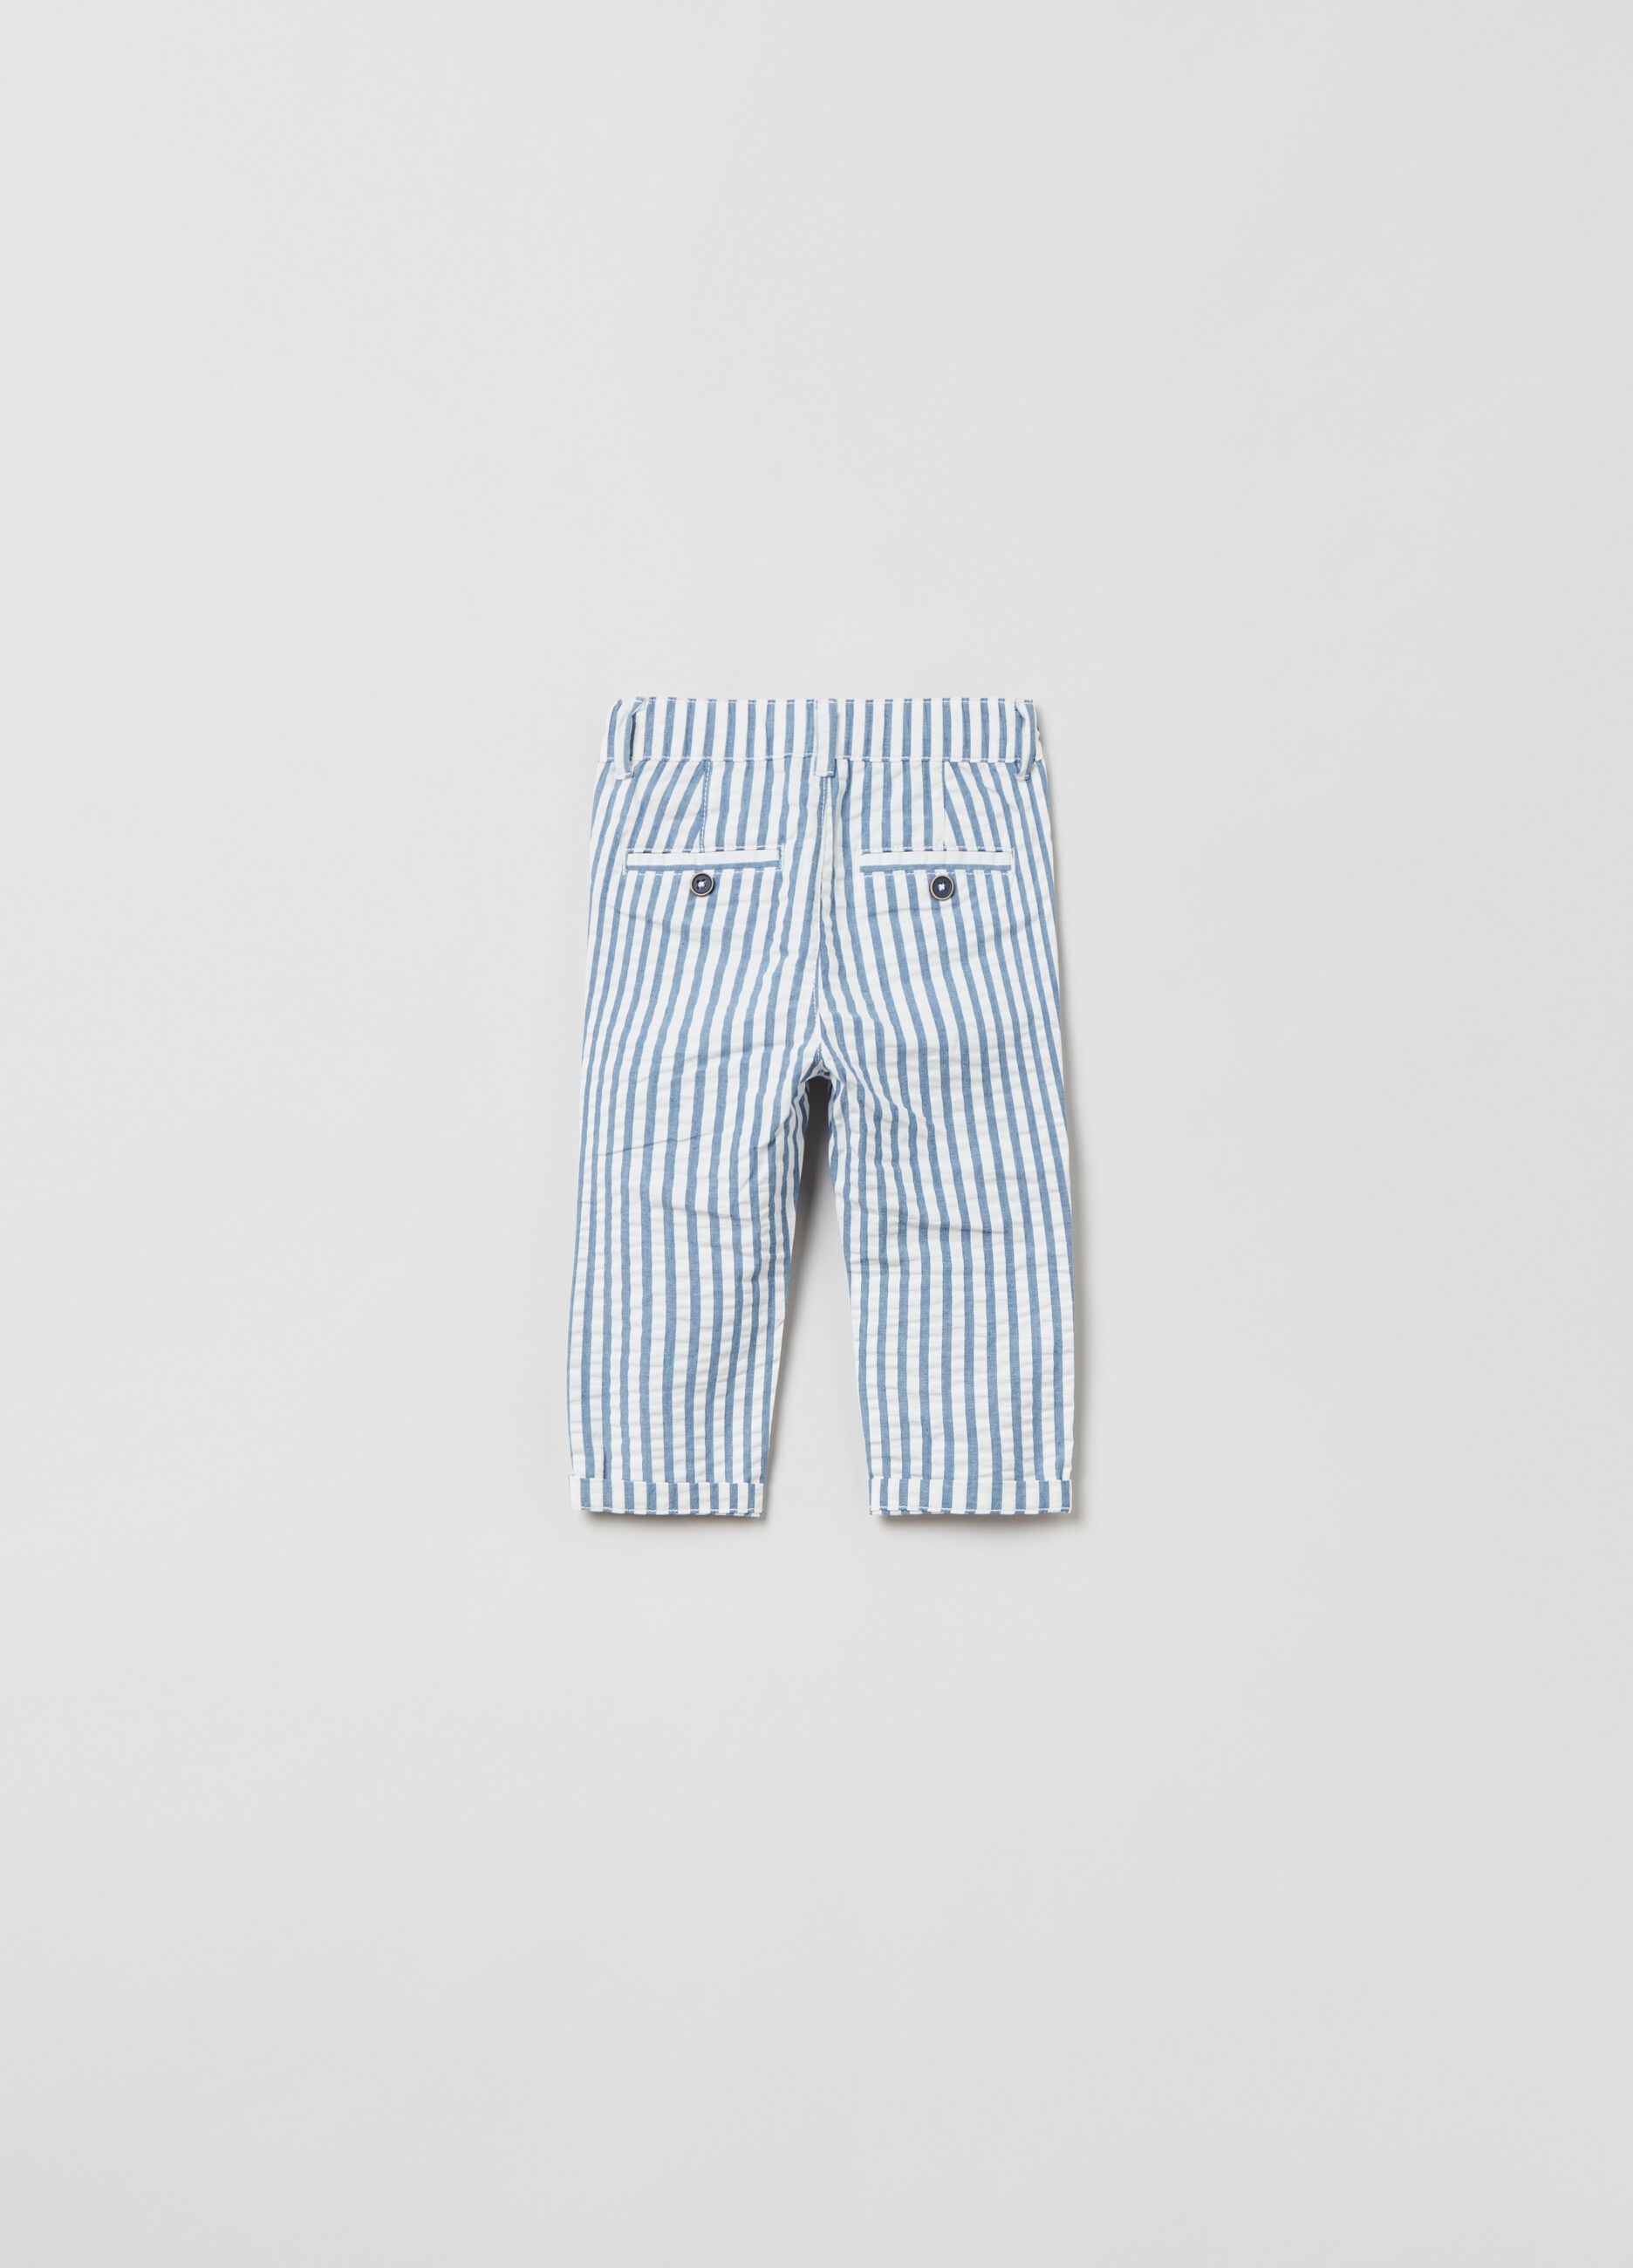 Trousers in yarn-dyed striped cotton